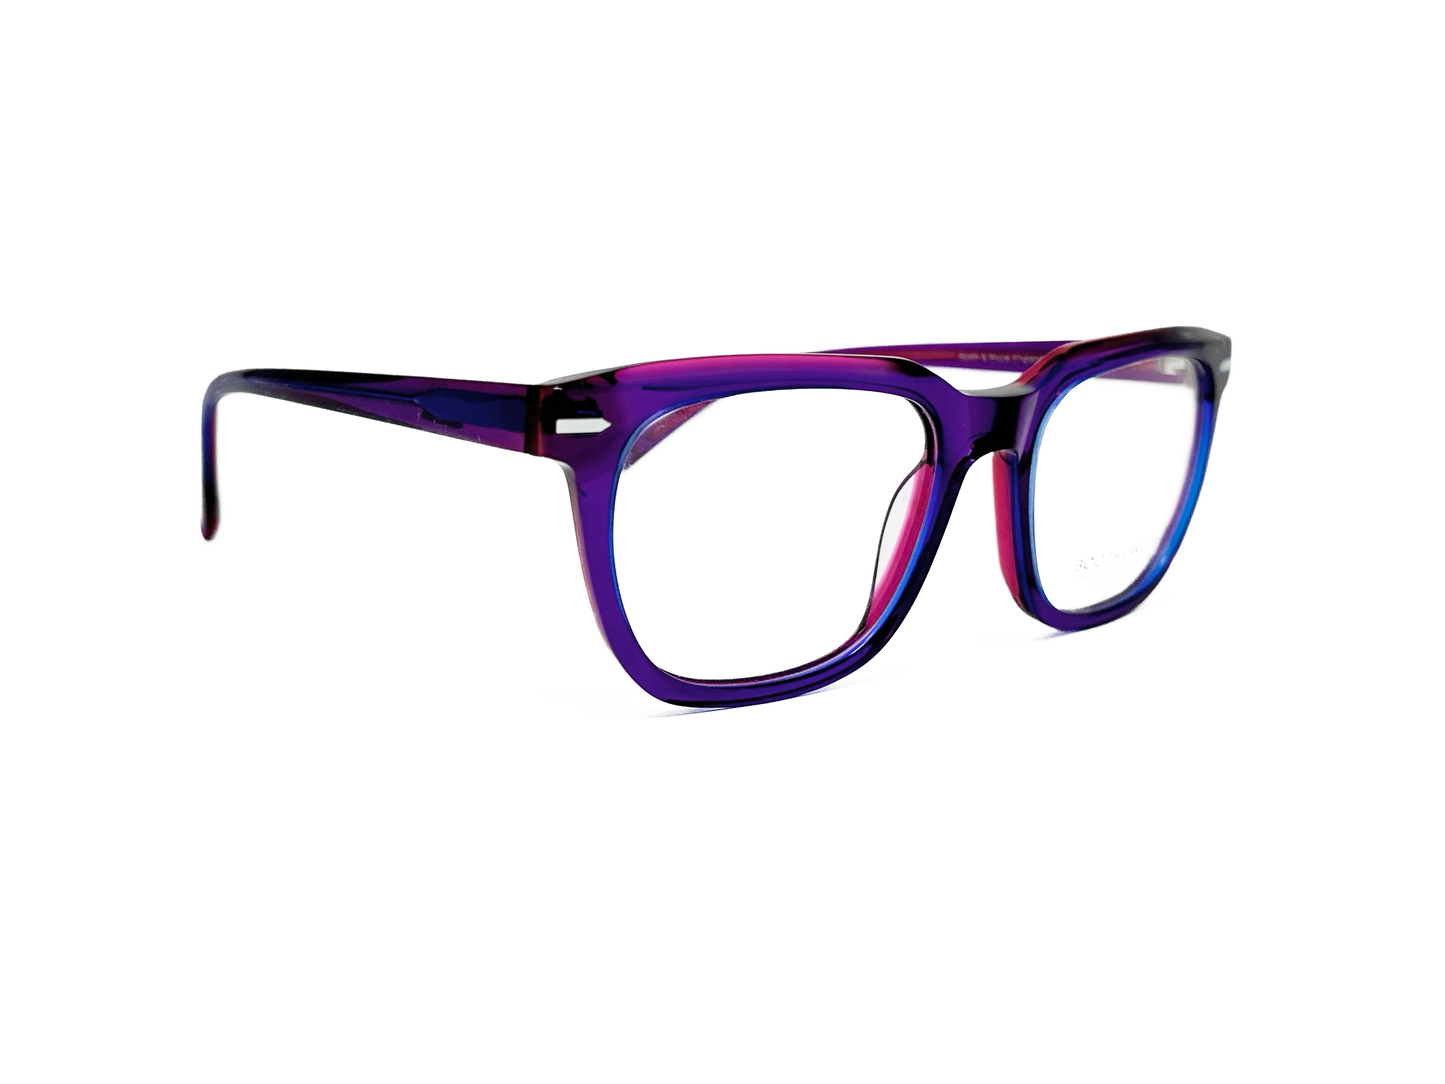 Booth & Bruce square acetate optical frame. Model: BB2201. Color: Stole the Show - Neon purple with pink tint on edges. Side view.